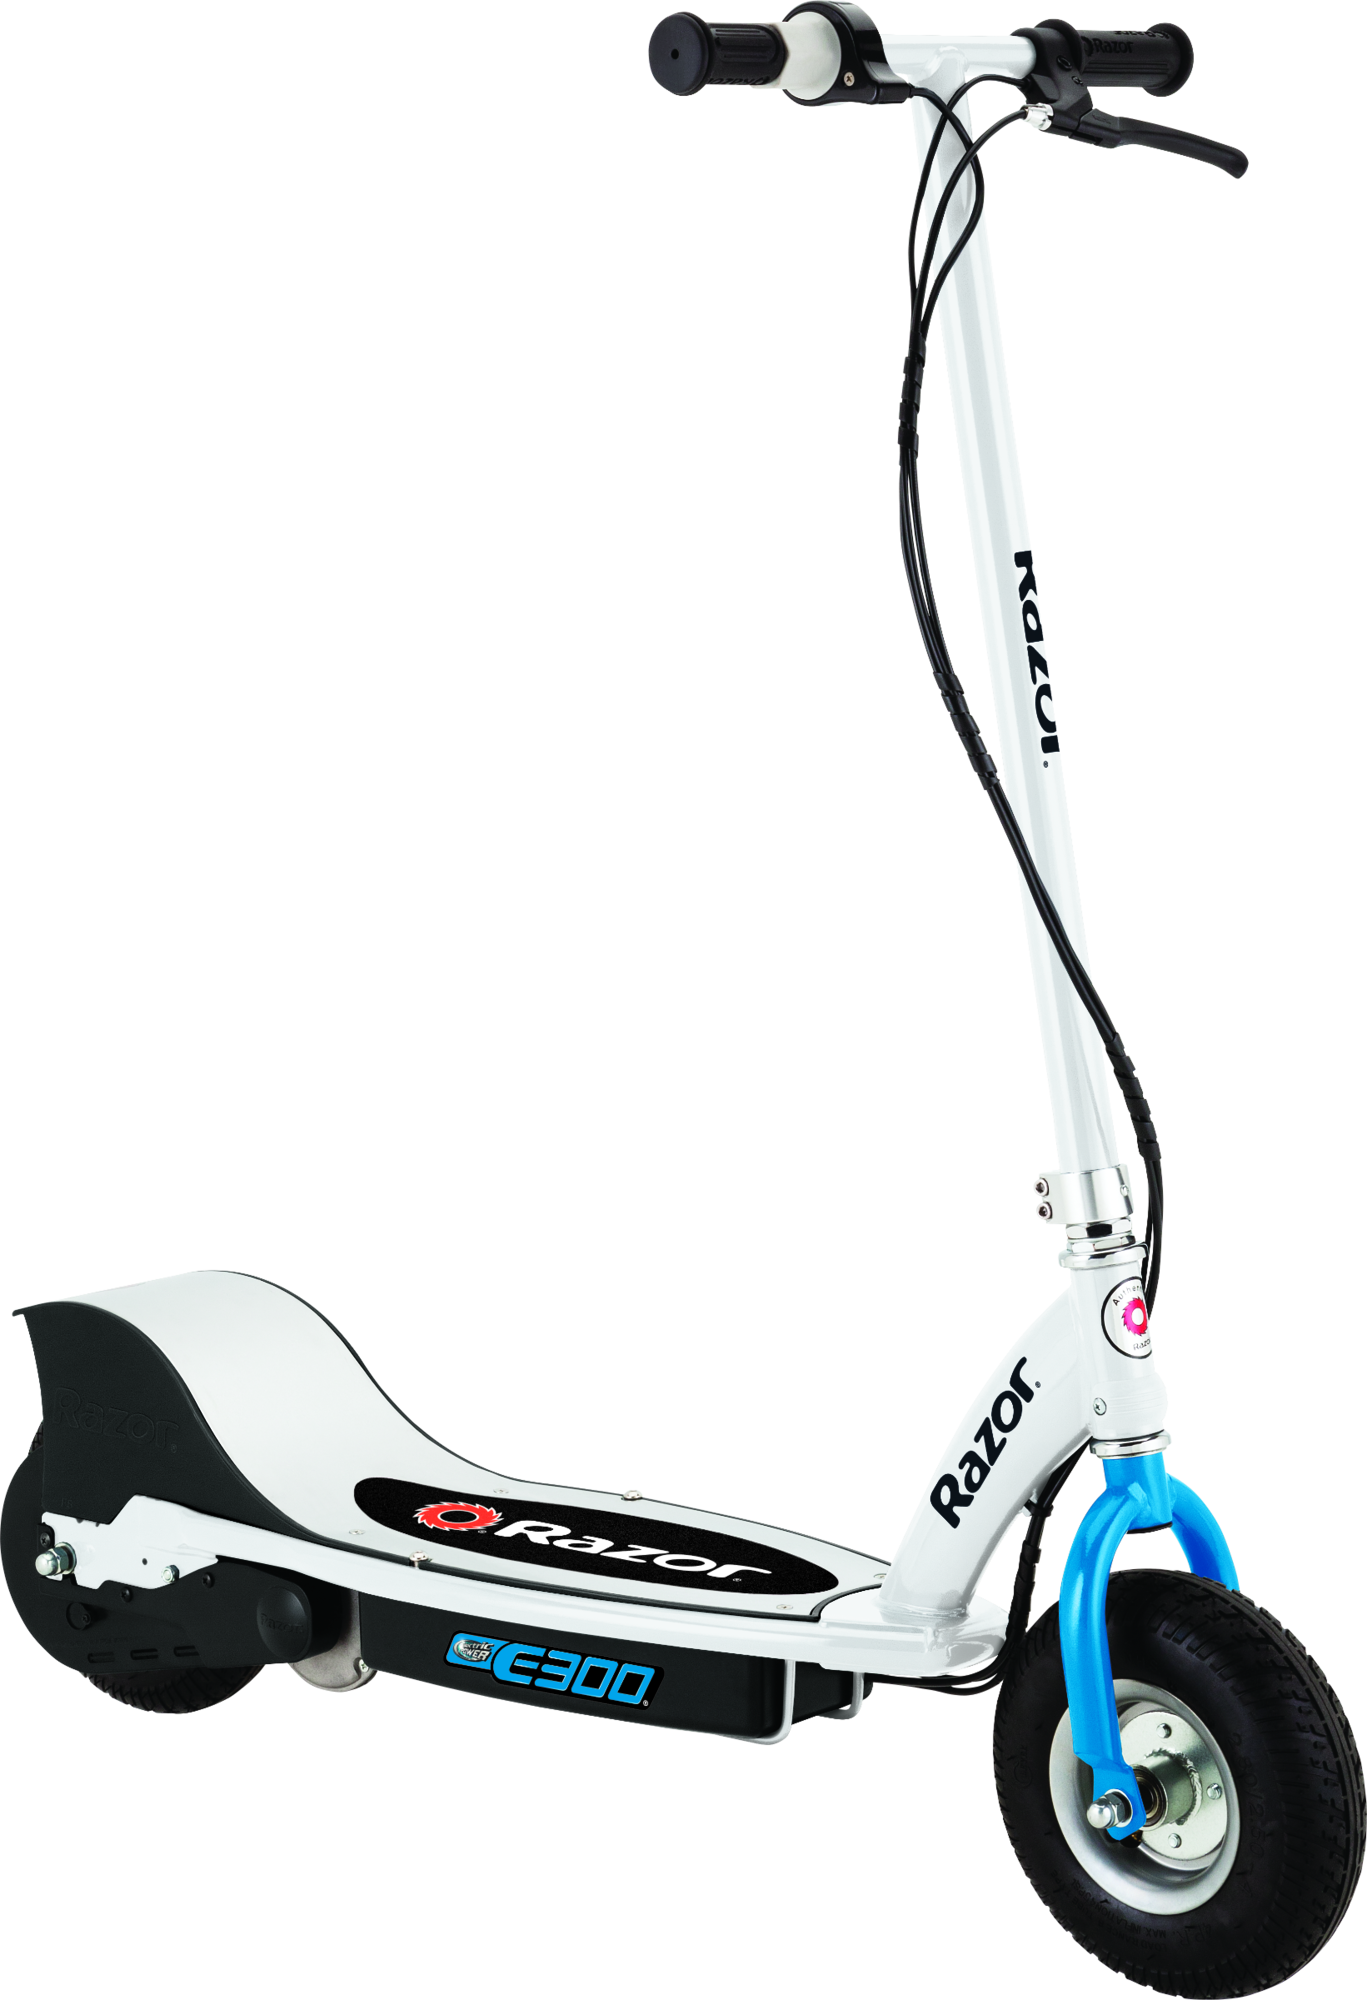 razor scooter for 9 year old